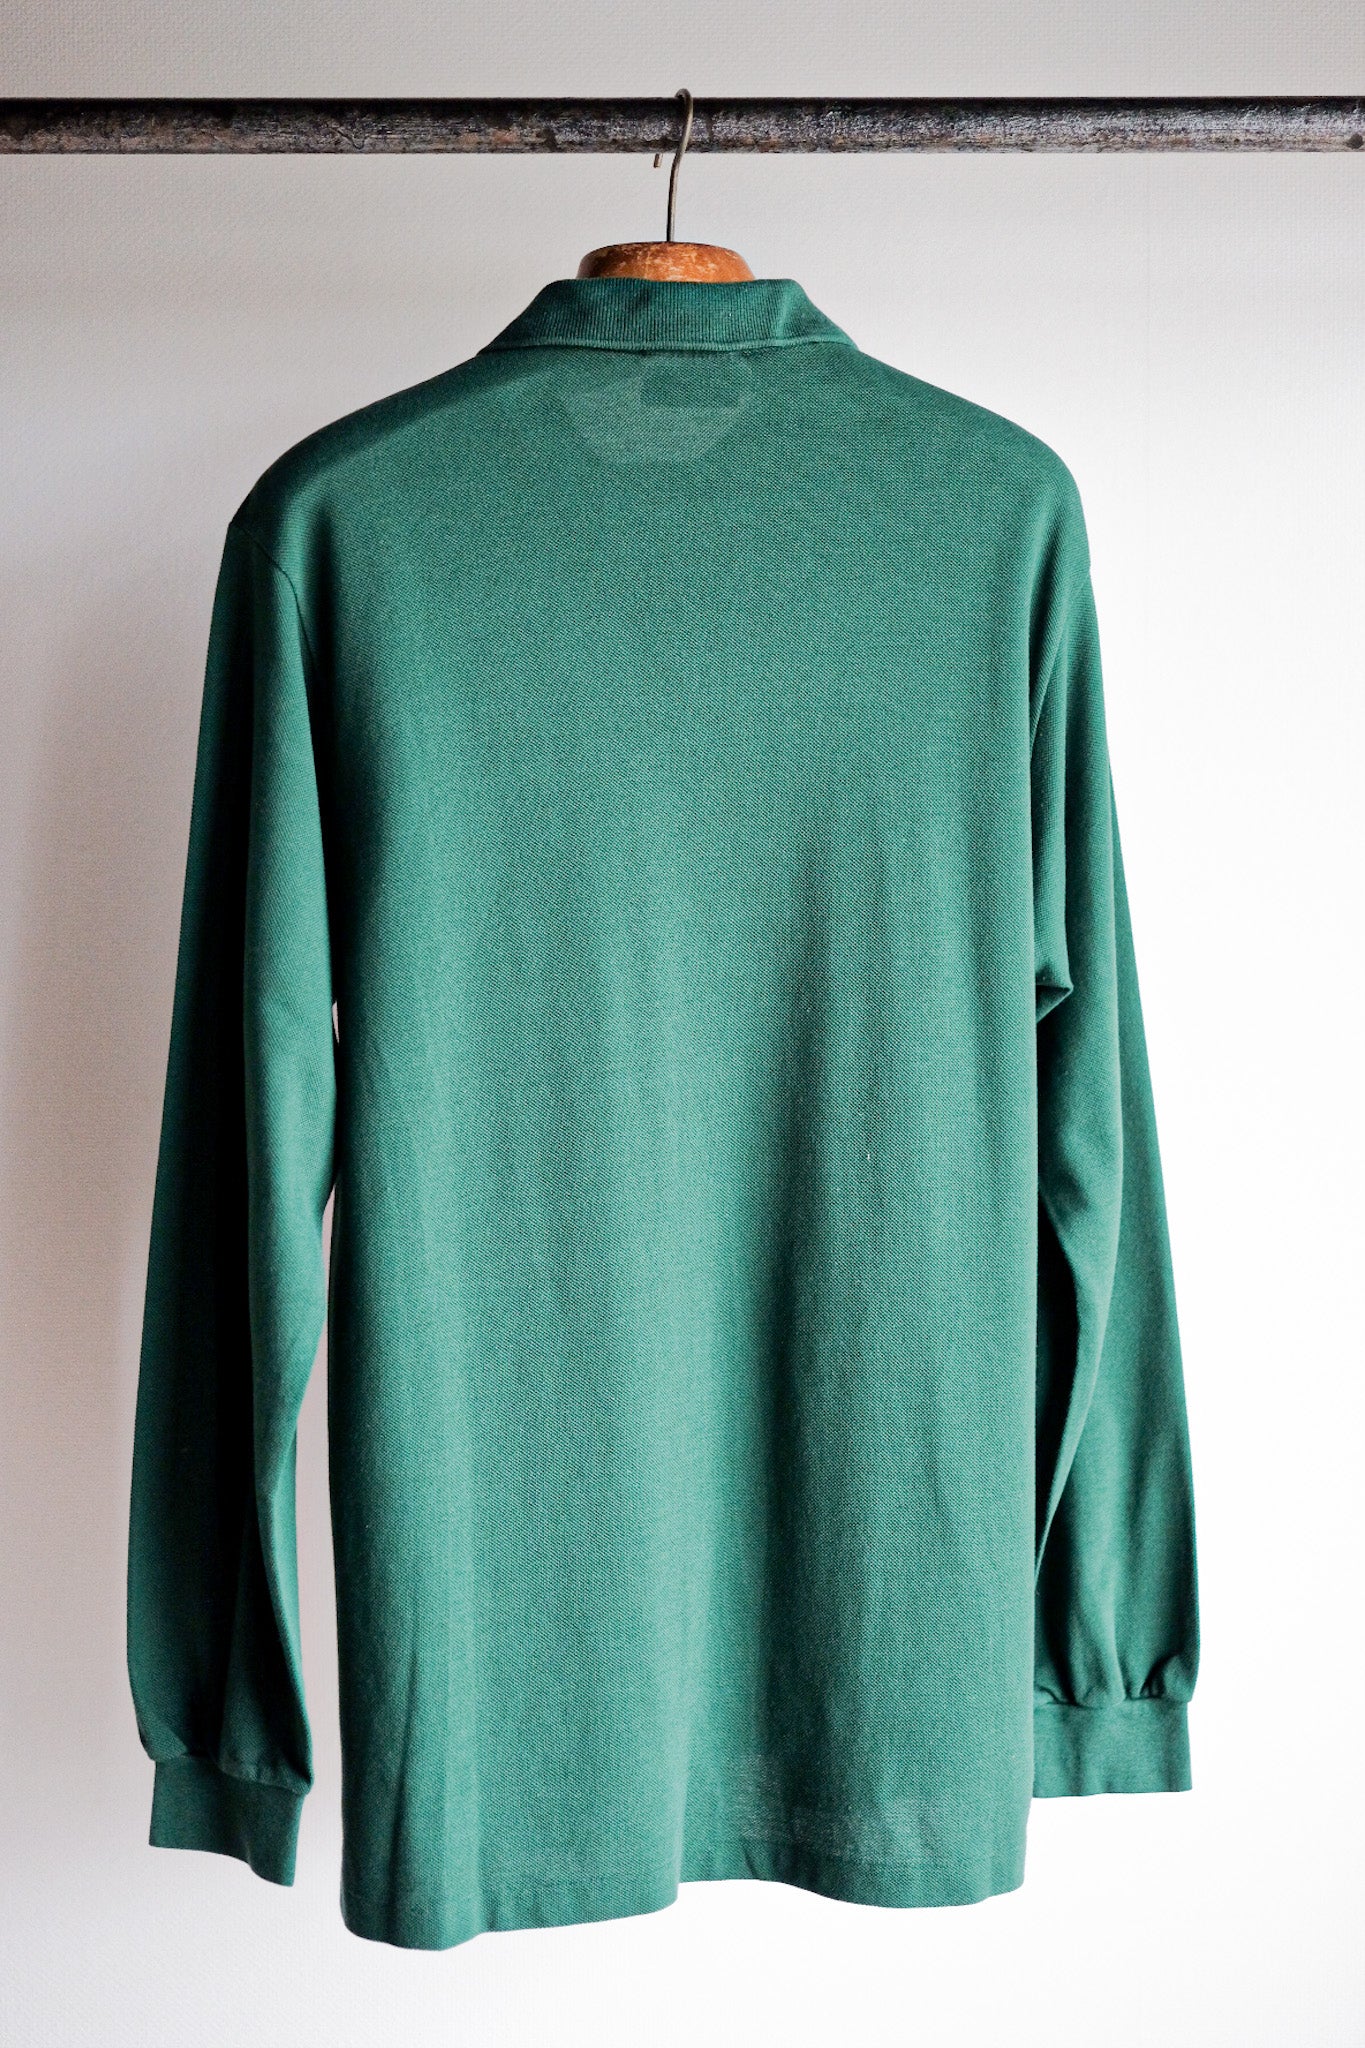 [~ 80's] Chemise Lacoste L/S Polo Size.5 "Forest Green"